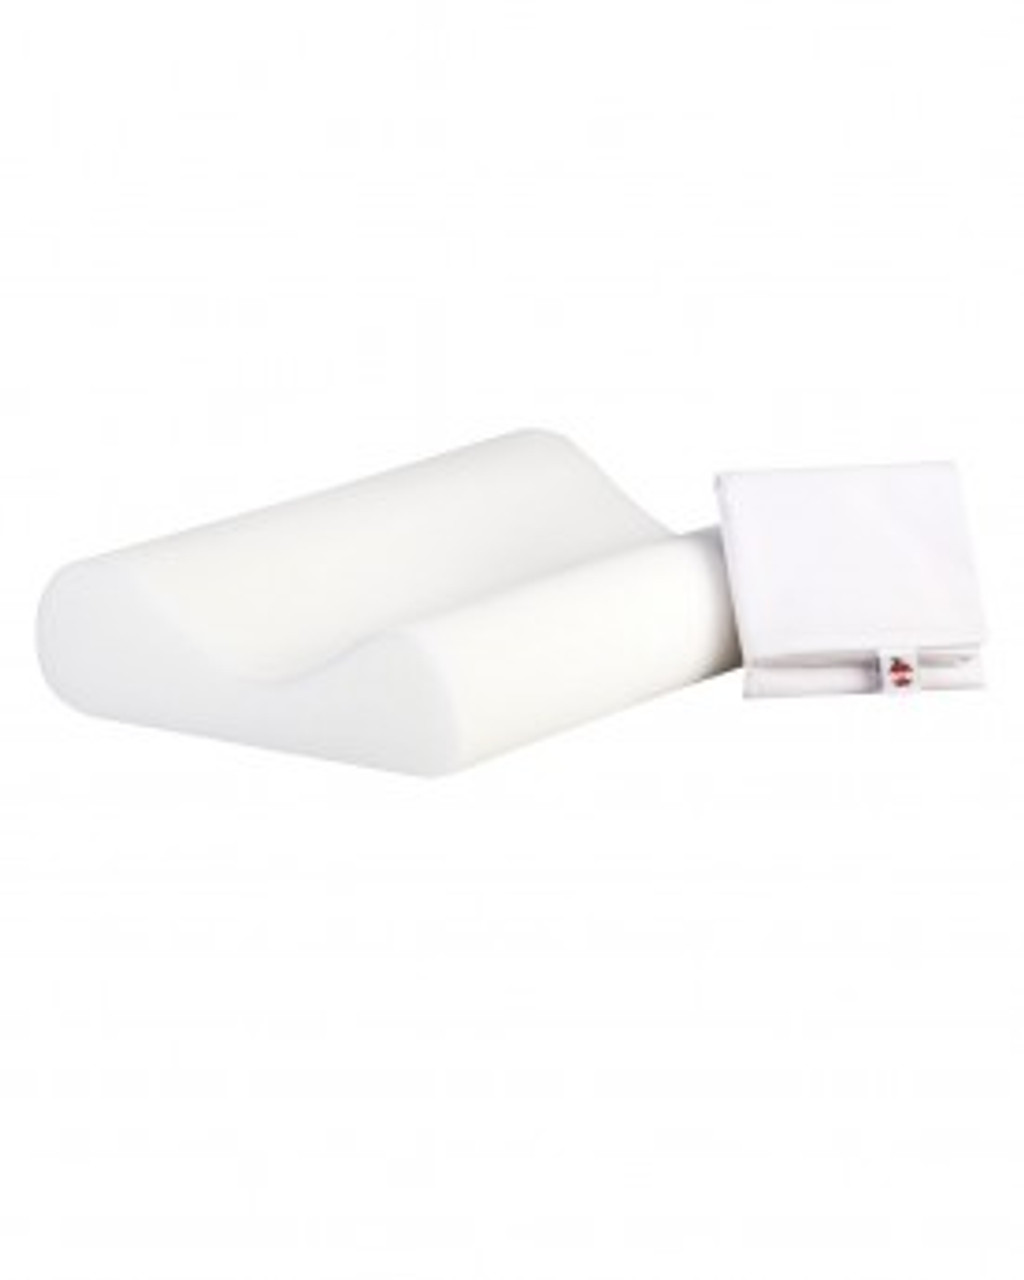 Core Products FOM-160 Basic Cervical Pillow Standard Support (FOM-160)